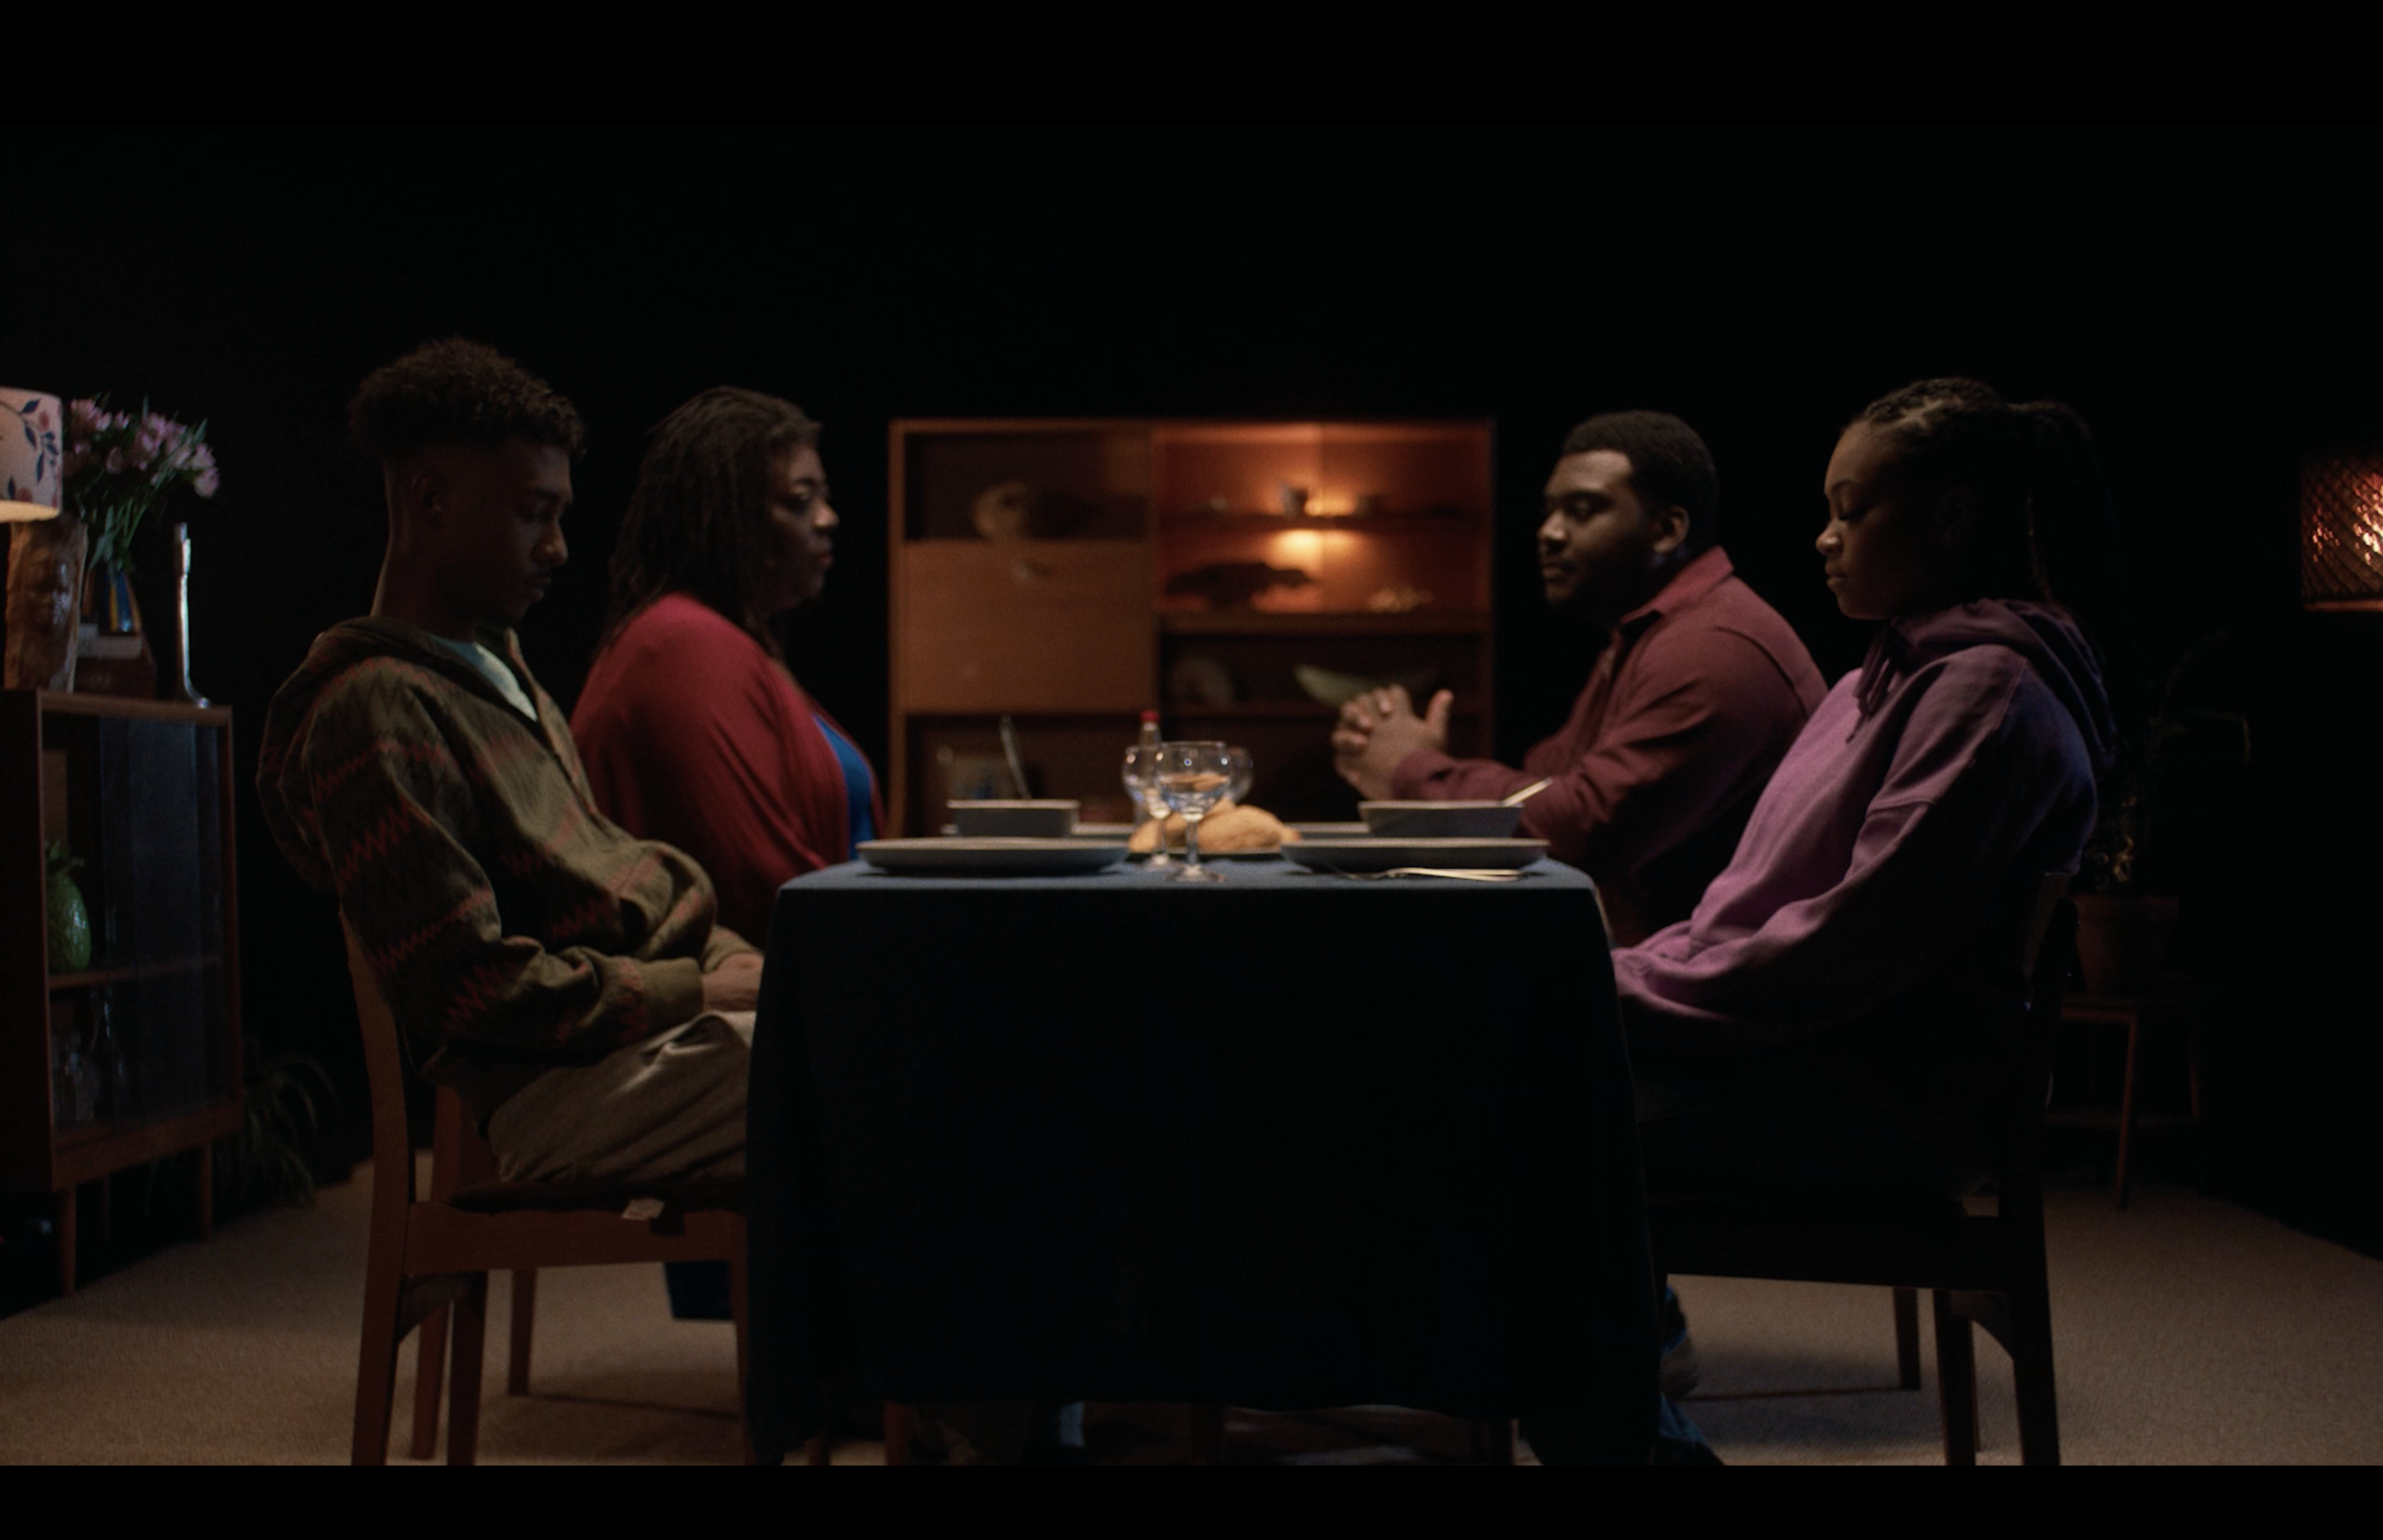 In a sound stage with black walls, a family of four individuals with dark skin is seated around a table. They wear solemn expressions, illuminated by soft, dim lighting. The warm glow of lamp lights highlights the wooden furniture in the background